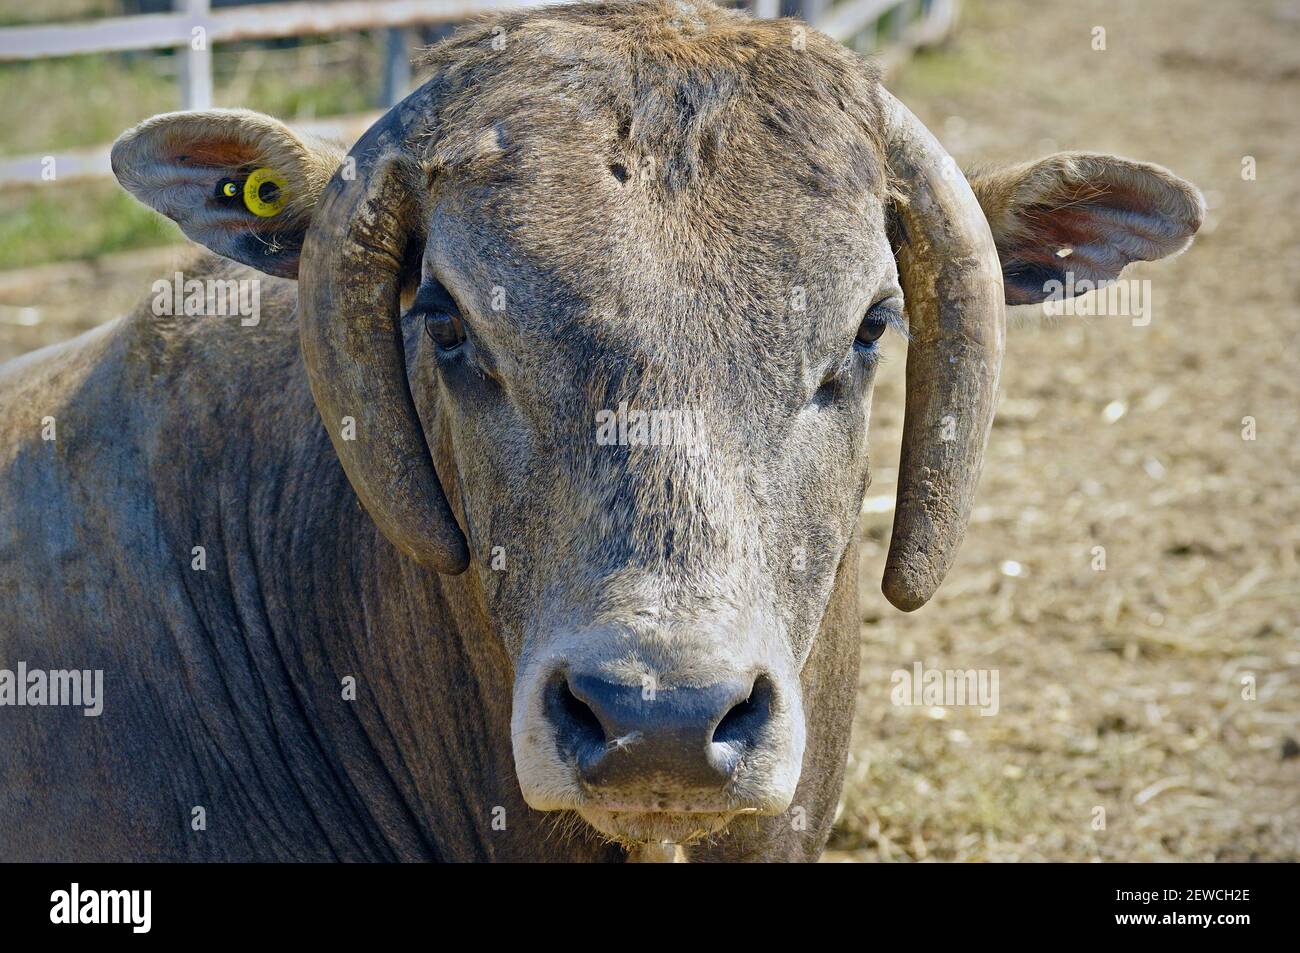 A close up portrait of the face of a rodeo bucking bull with his horns wrapped around his face Stock Photo